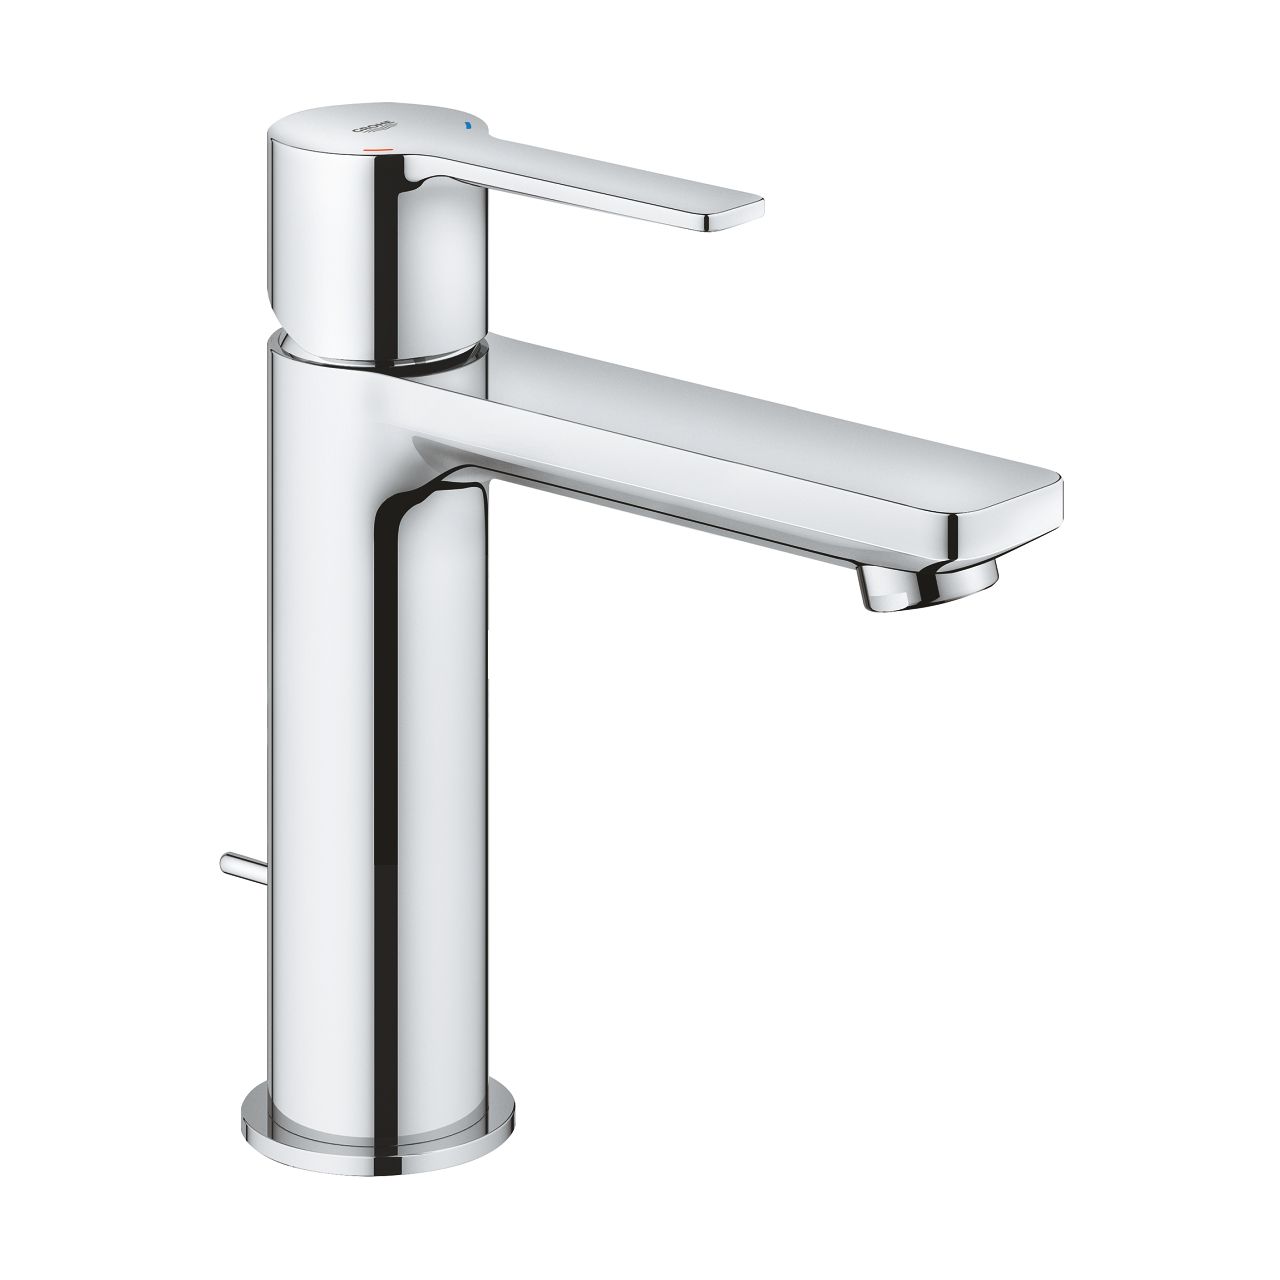  Grohe Lineare Single-lever basin mixer S-Size - 32114001 